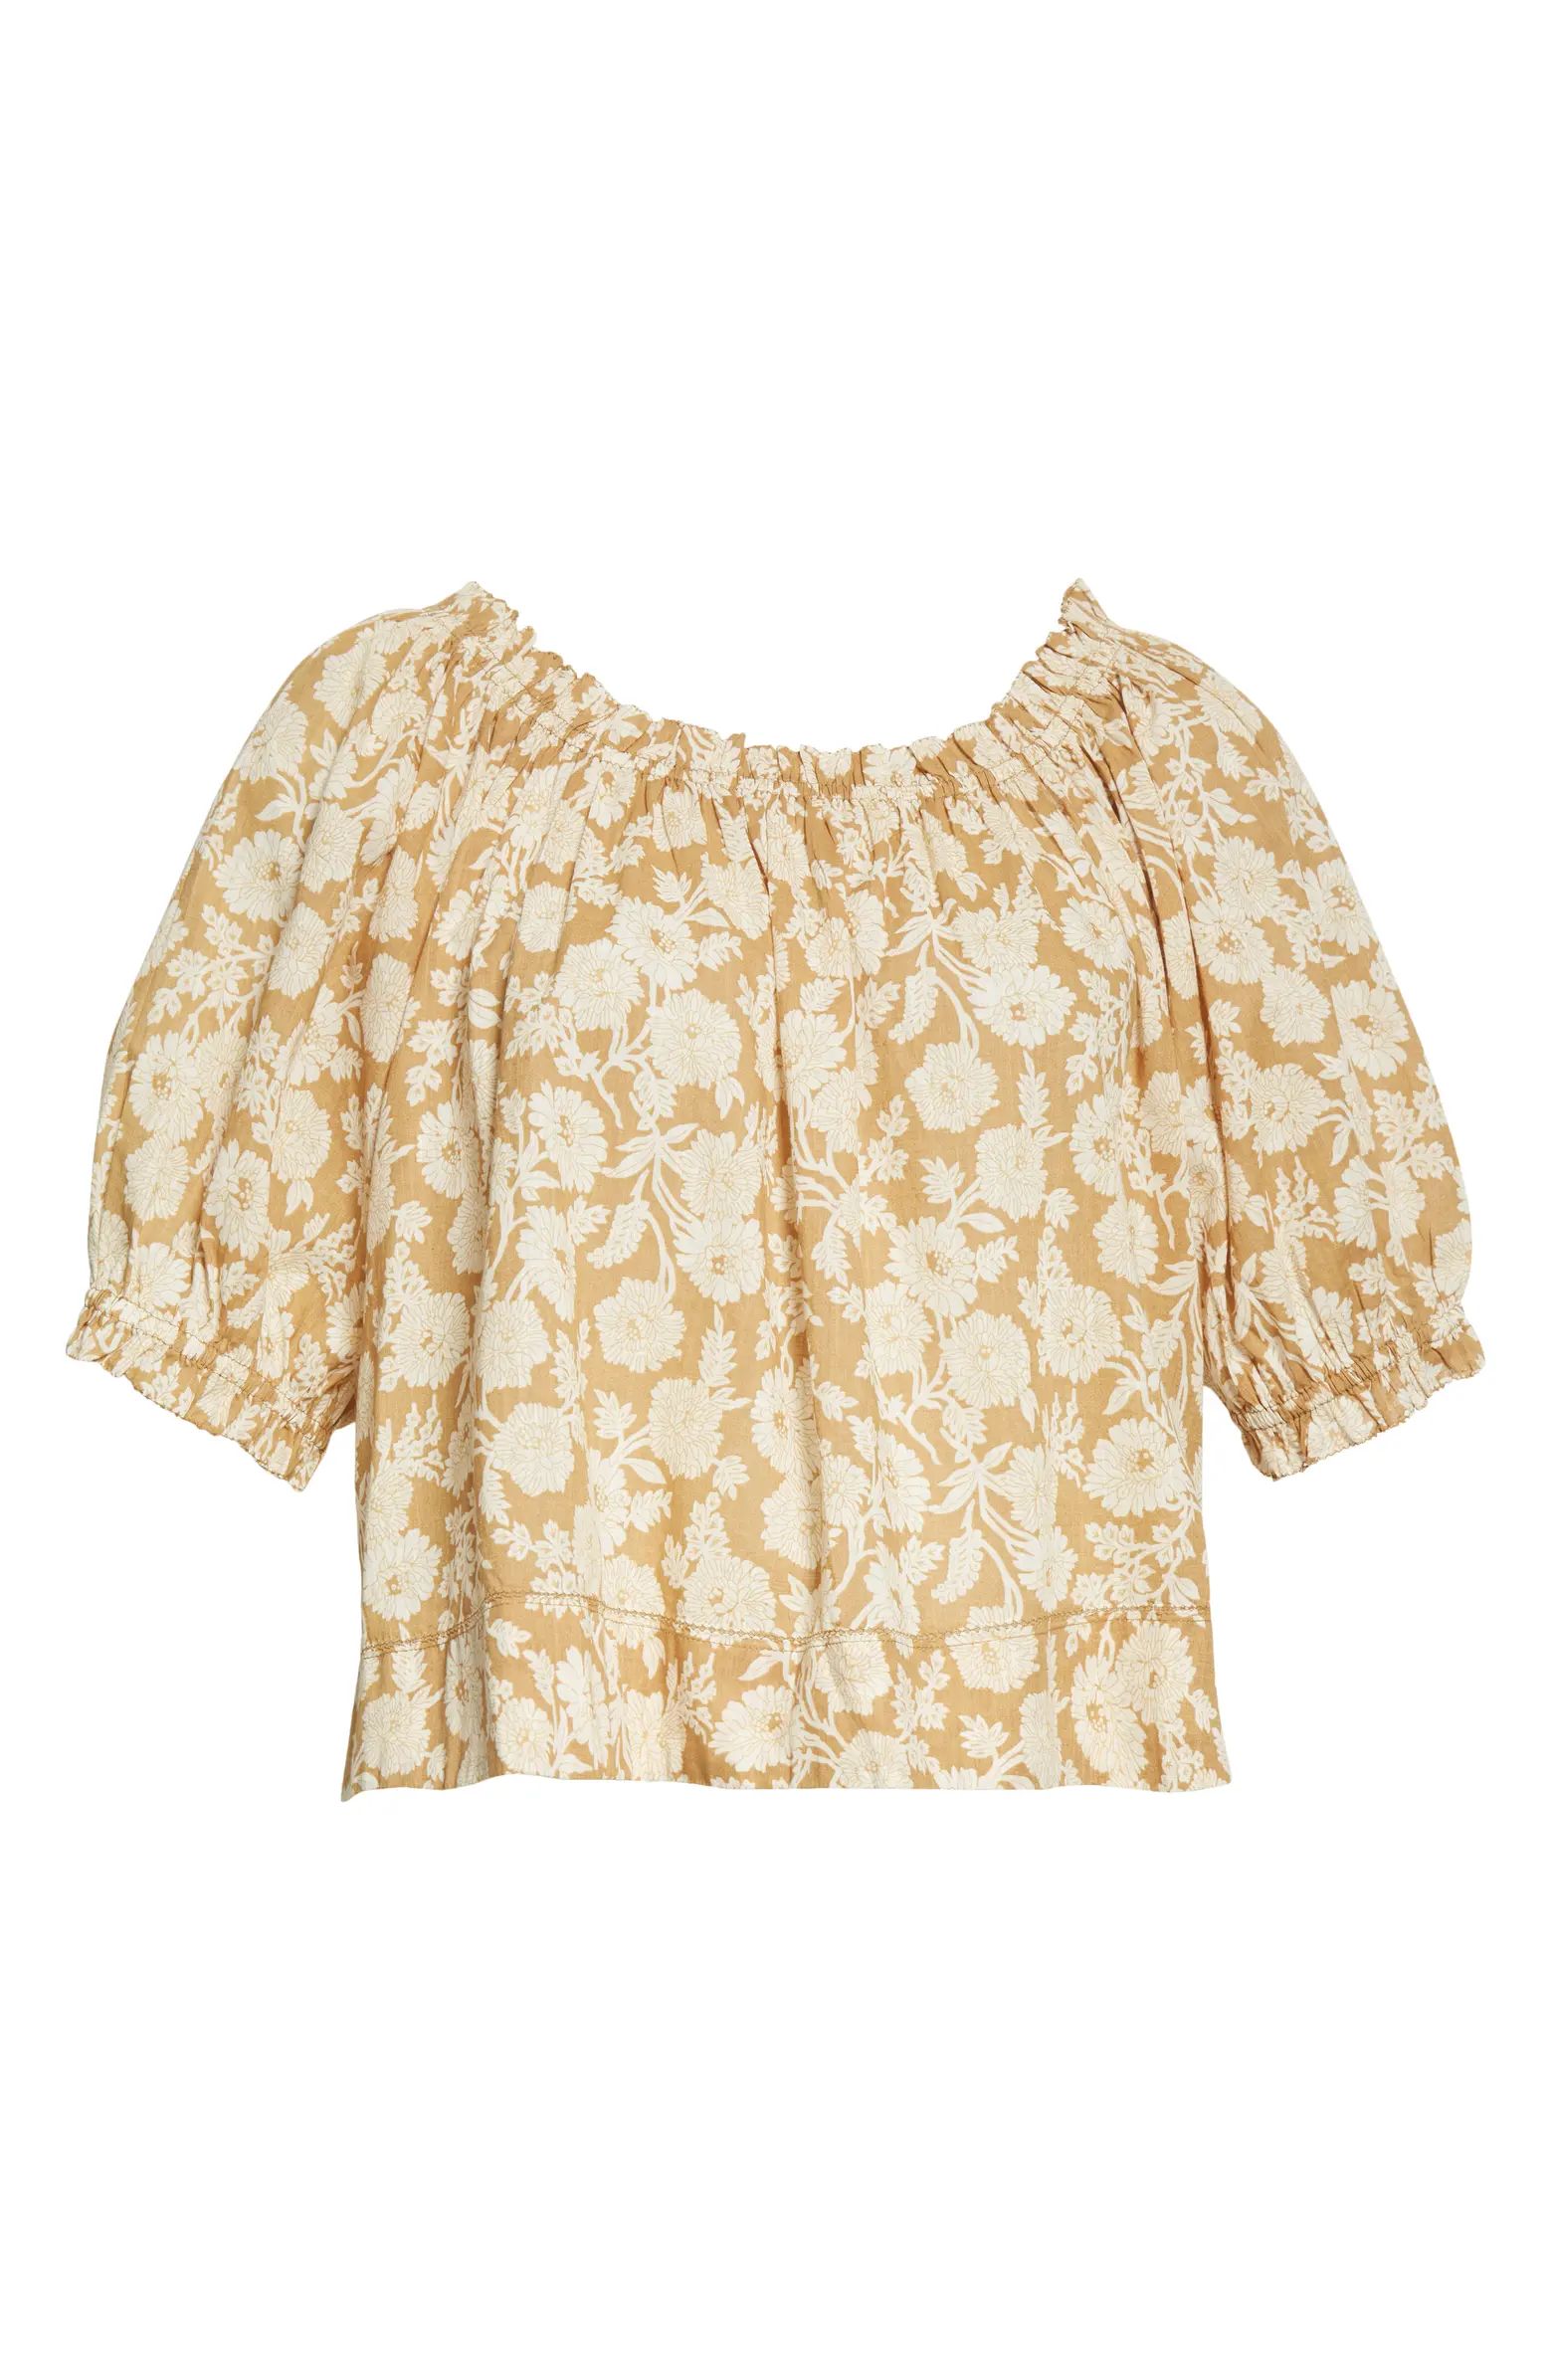 THE GREAT. The Garland Puff Sleeve Top | Nordstrom | Nordstrom